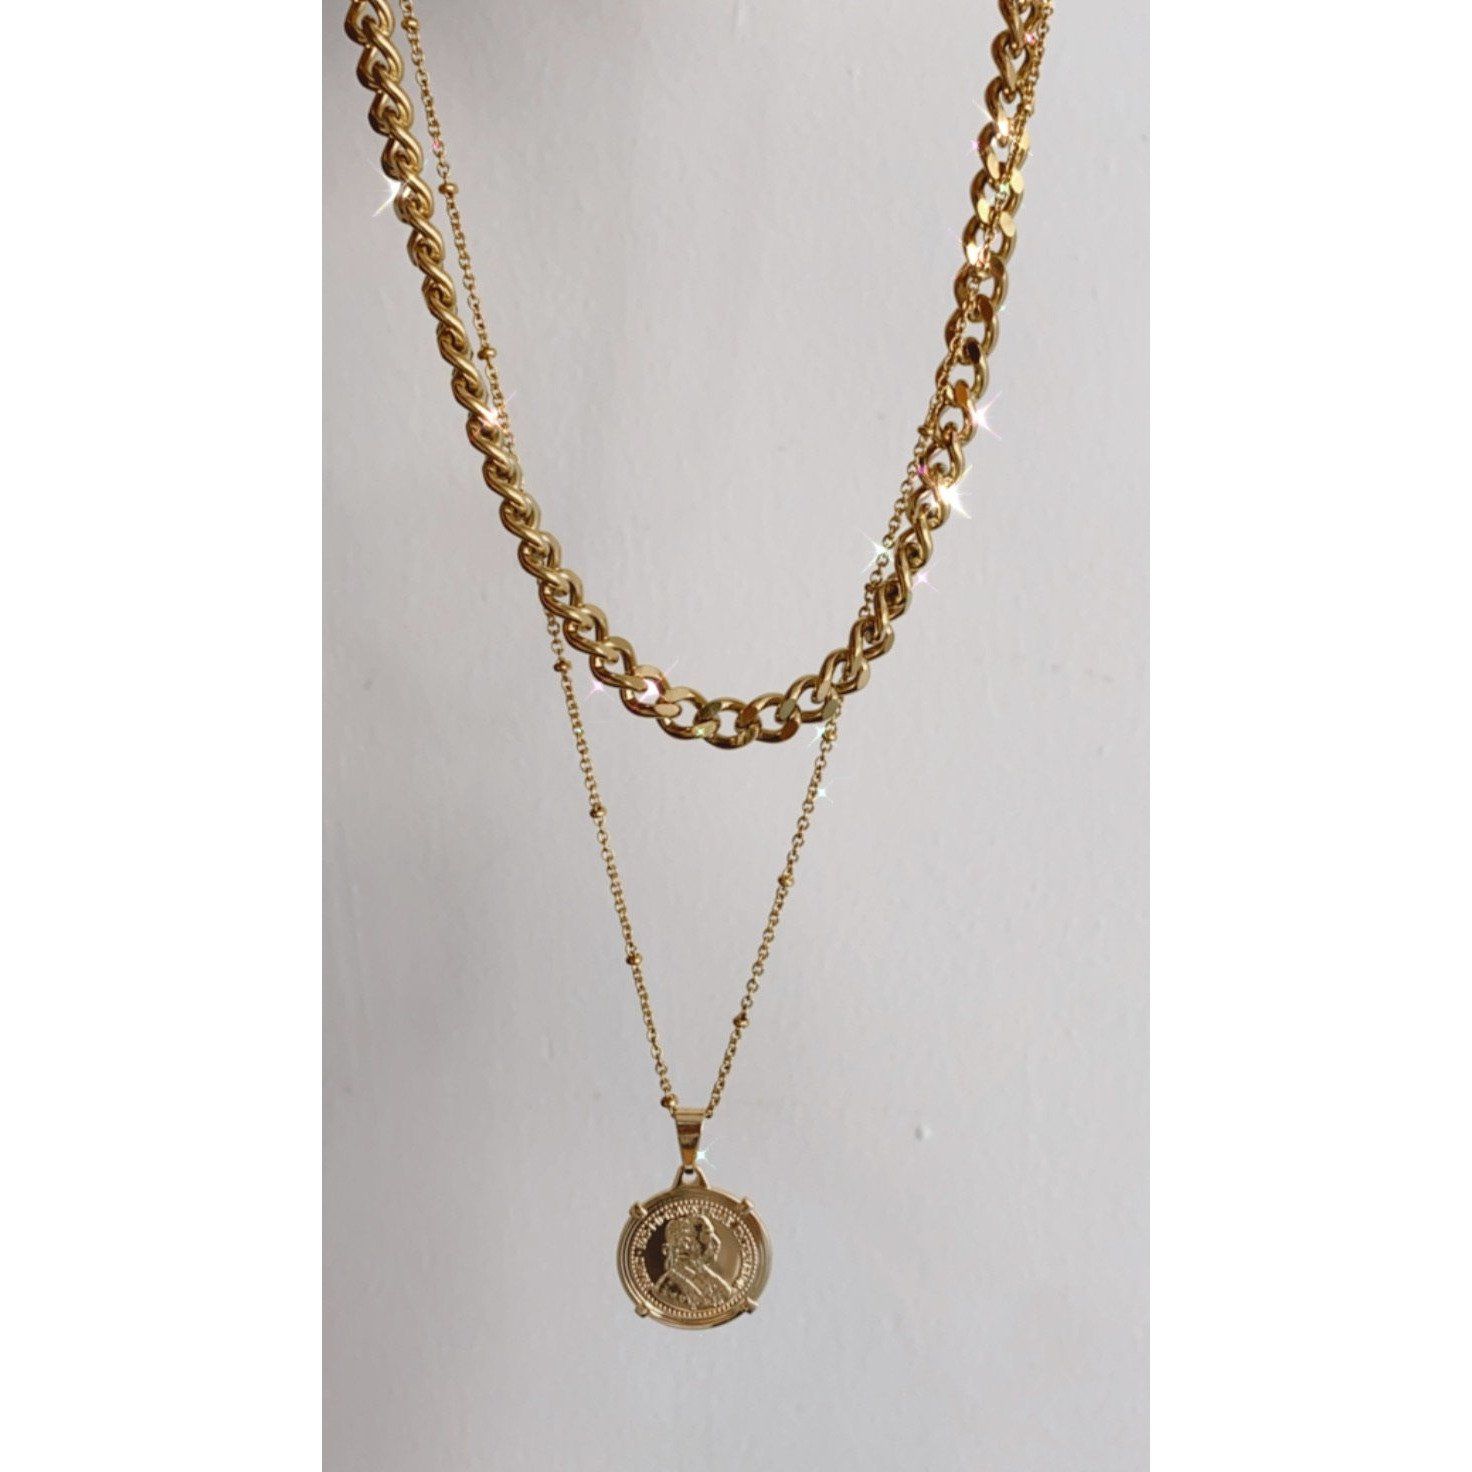 Gold Plated Cuban Link Coin Necklace - Hypoallergenic & Tarnish Resistant, 15"-20" Length with 2" Extender Bijou Her